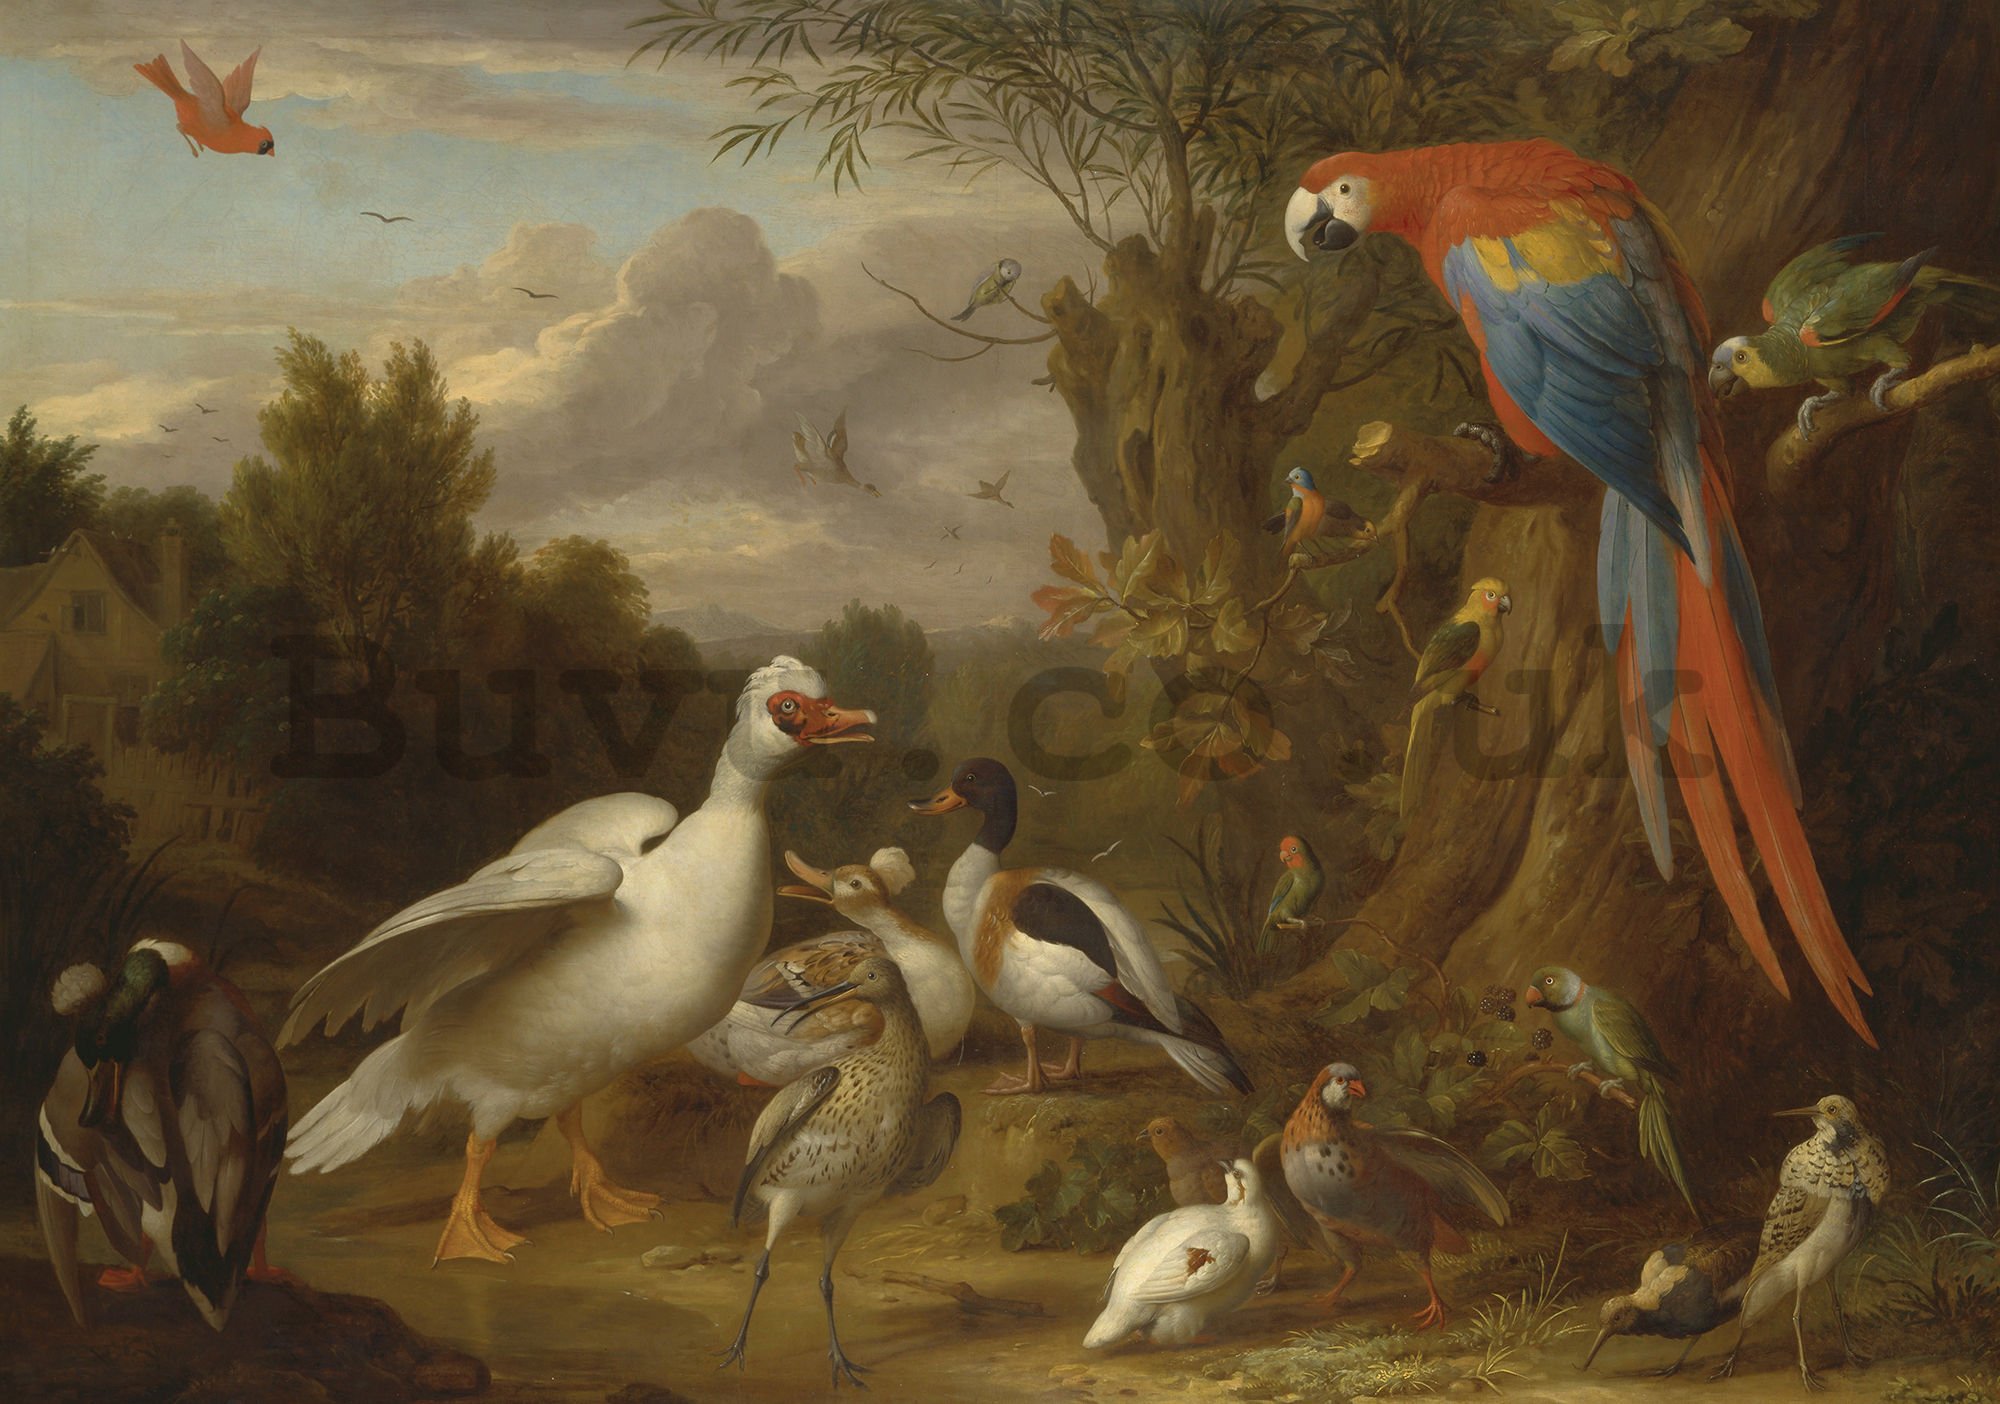 Wall mural: Ducks, Parrots, and Other Birds in a Landscape - 104x152,5 cm